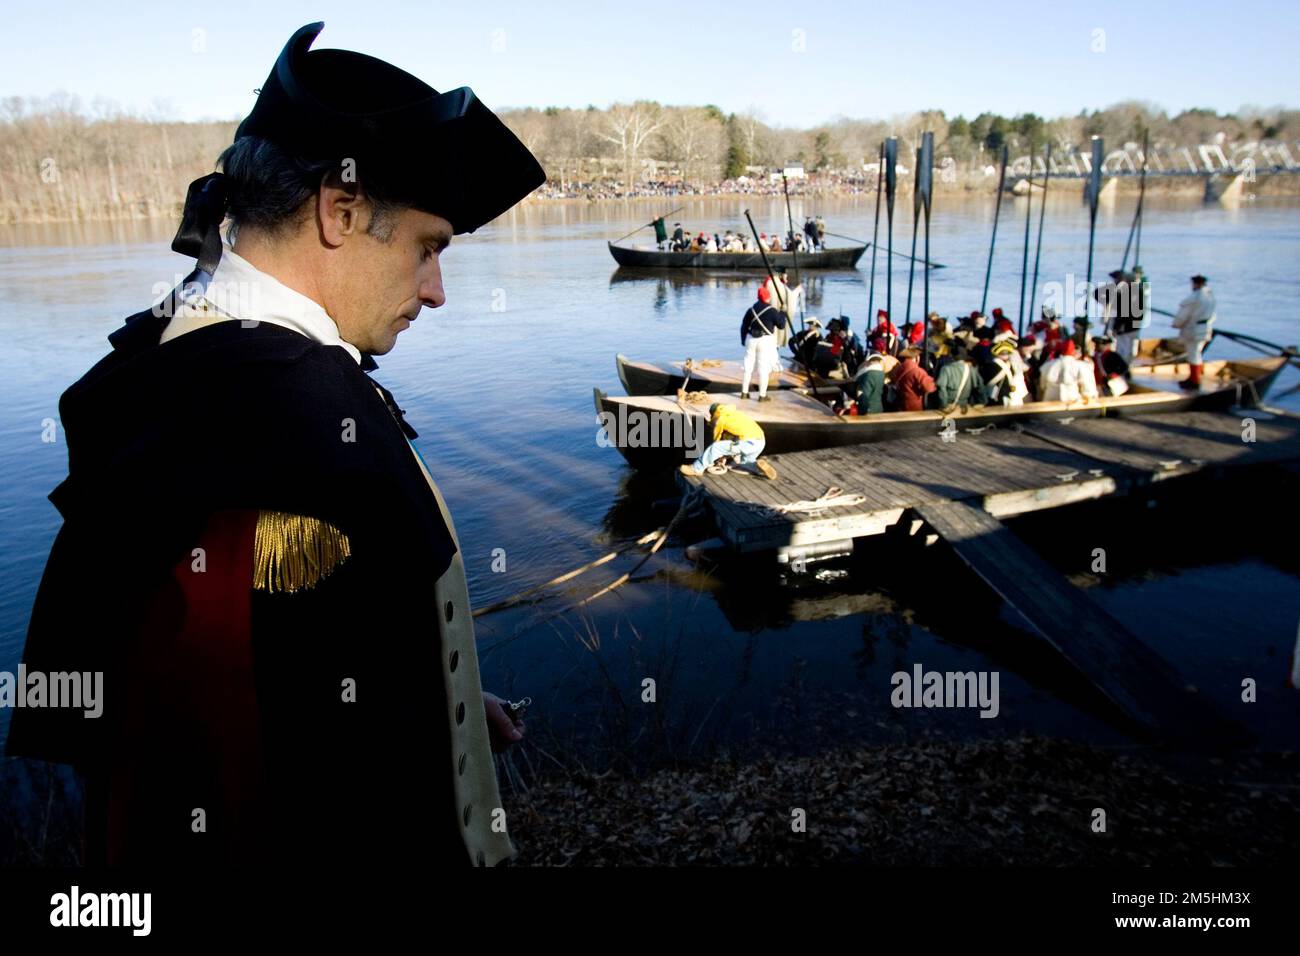 Delaware River Scenic Byway - Annual Christmas Crossing Reenactment. Durham boats full of colonial soldiers wait in the waters of the Delaware River on Christmas morning, while General George Washington contemplates the surprise attack on the Hessian's encampment at Trenton during the reenactment. Location: Trenton, New Jersey Stock Photo